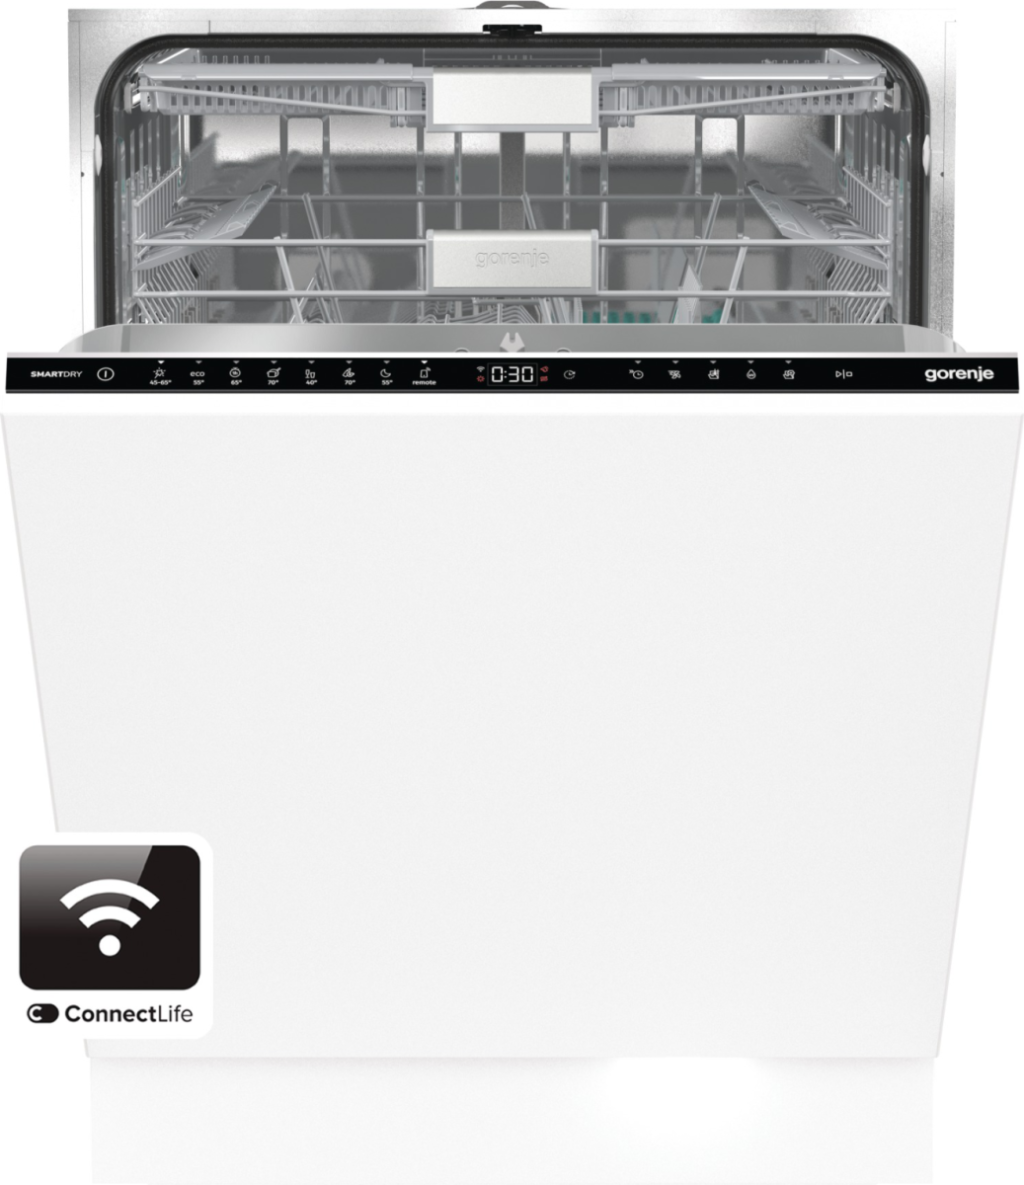 Built-in | Dishwasher | GV693C60UVAD | Width 59.8 cm | Number of place settings 16 | Number of programs 7 | Energy efficiency class C | Display | AquaStop function | Integrated automatic dosing system